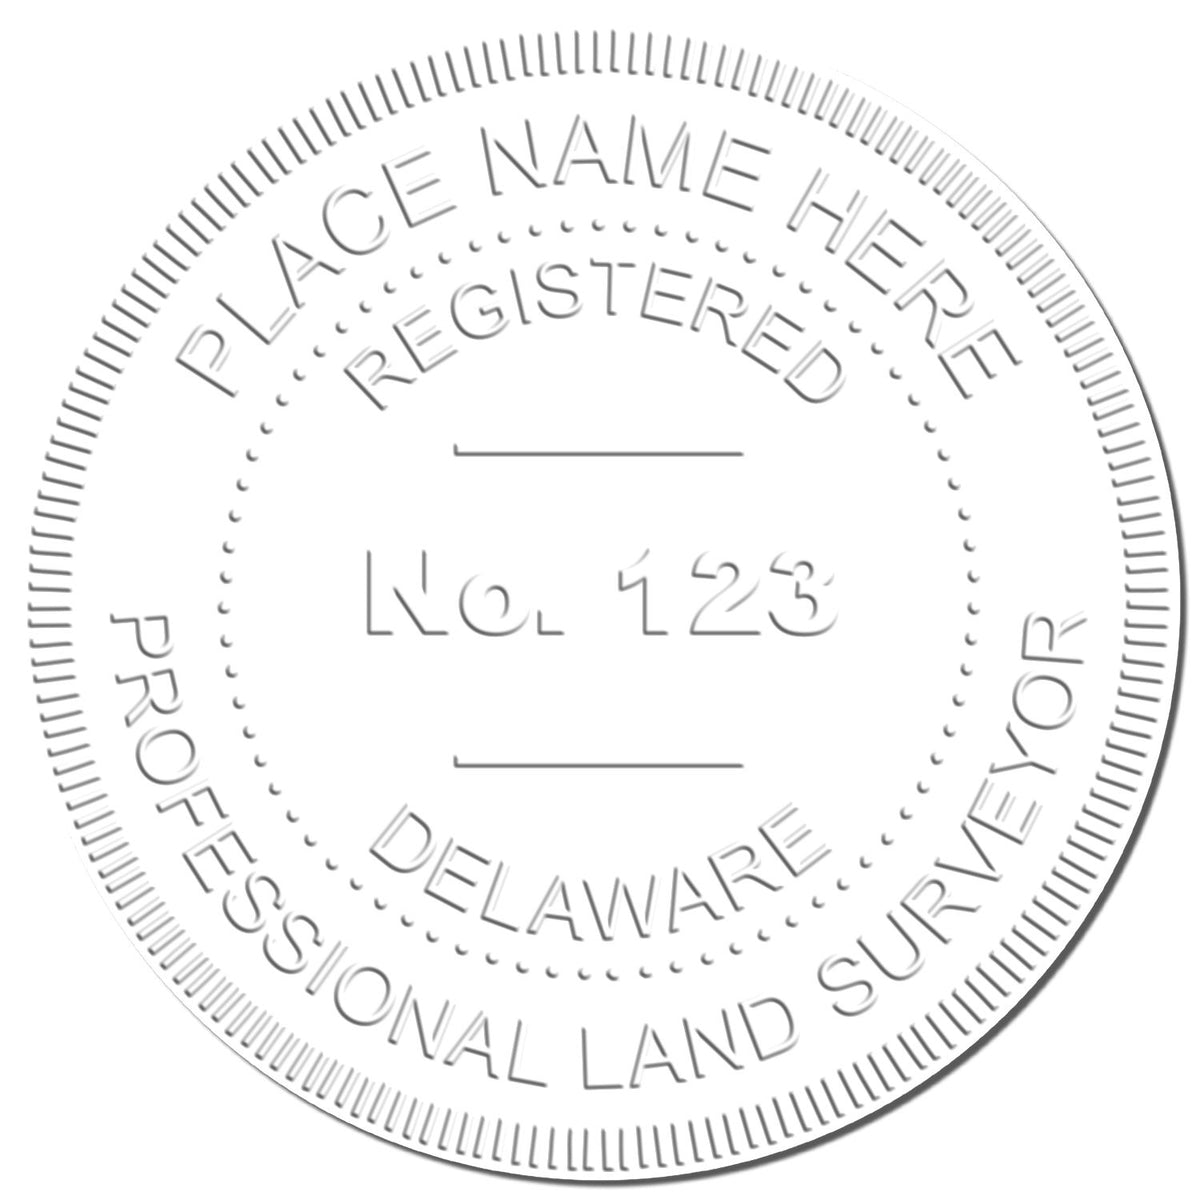 This paper is stamped with a sample imprint of the State of Delaware Soft Land Surveyor Embossing Seal, signifying its quality and reliability.